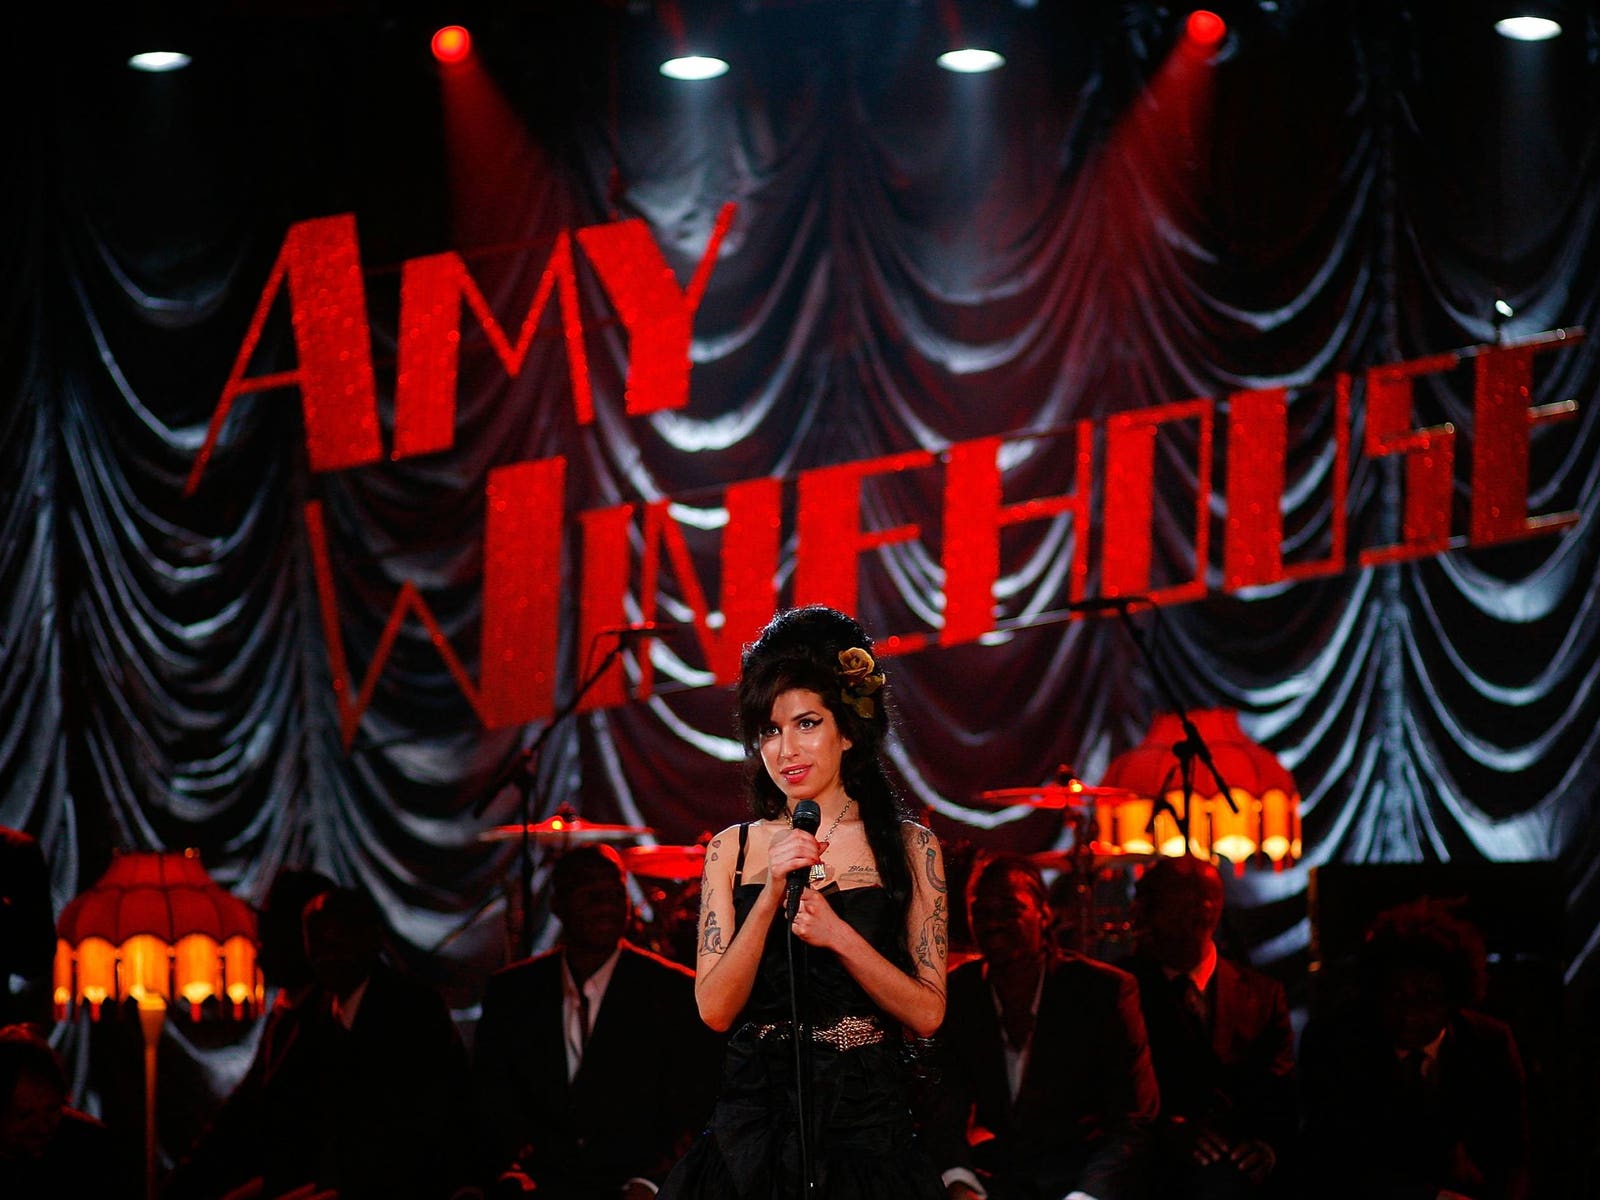 Amy Winehouse performs at the 50th GRAMMY Awards live via satellite from London